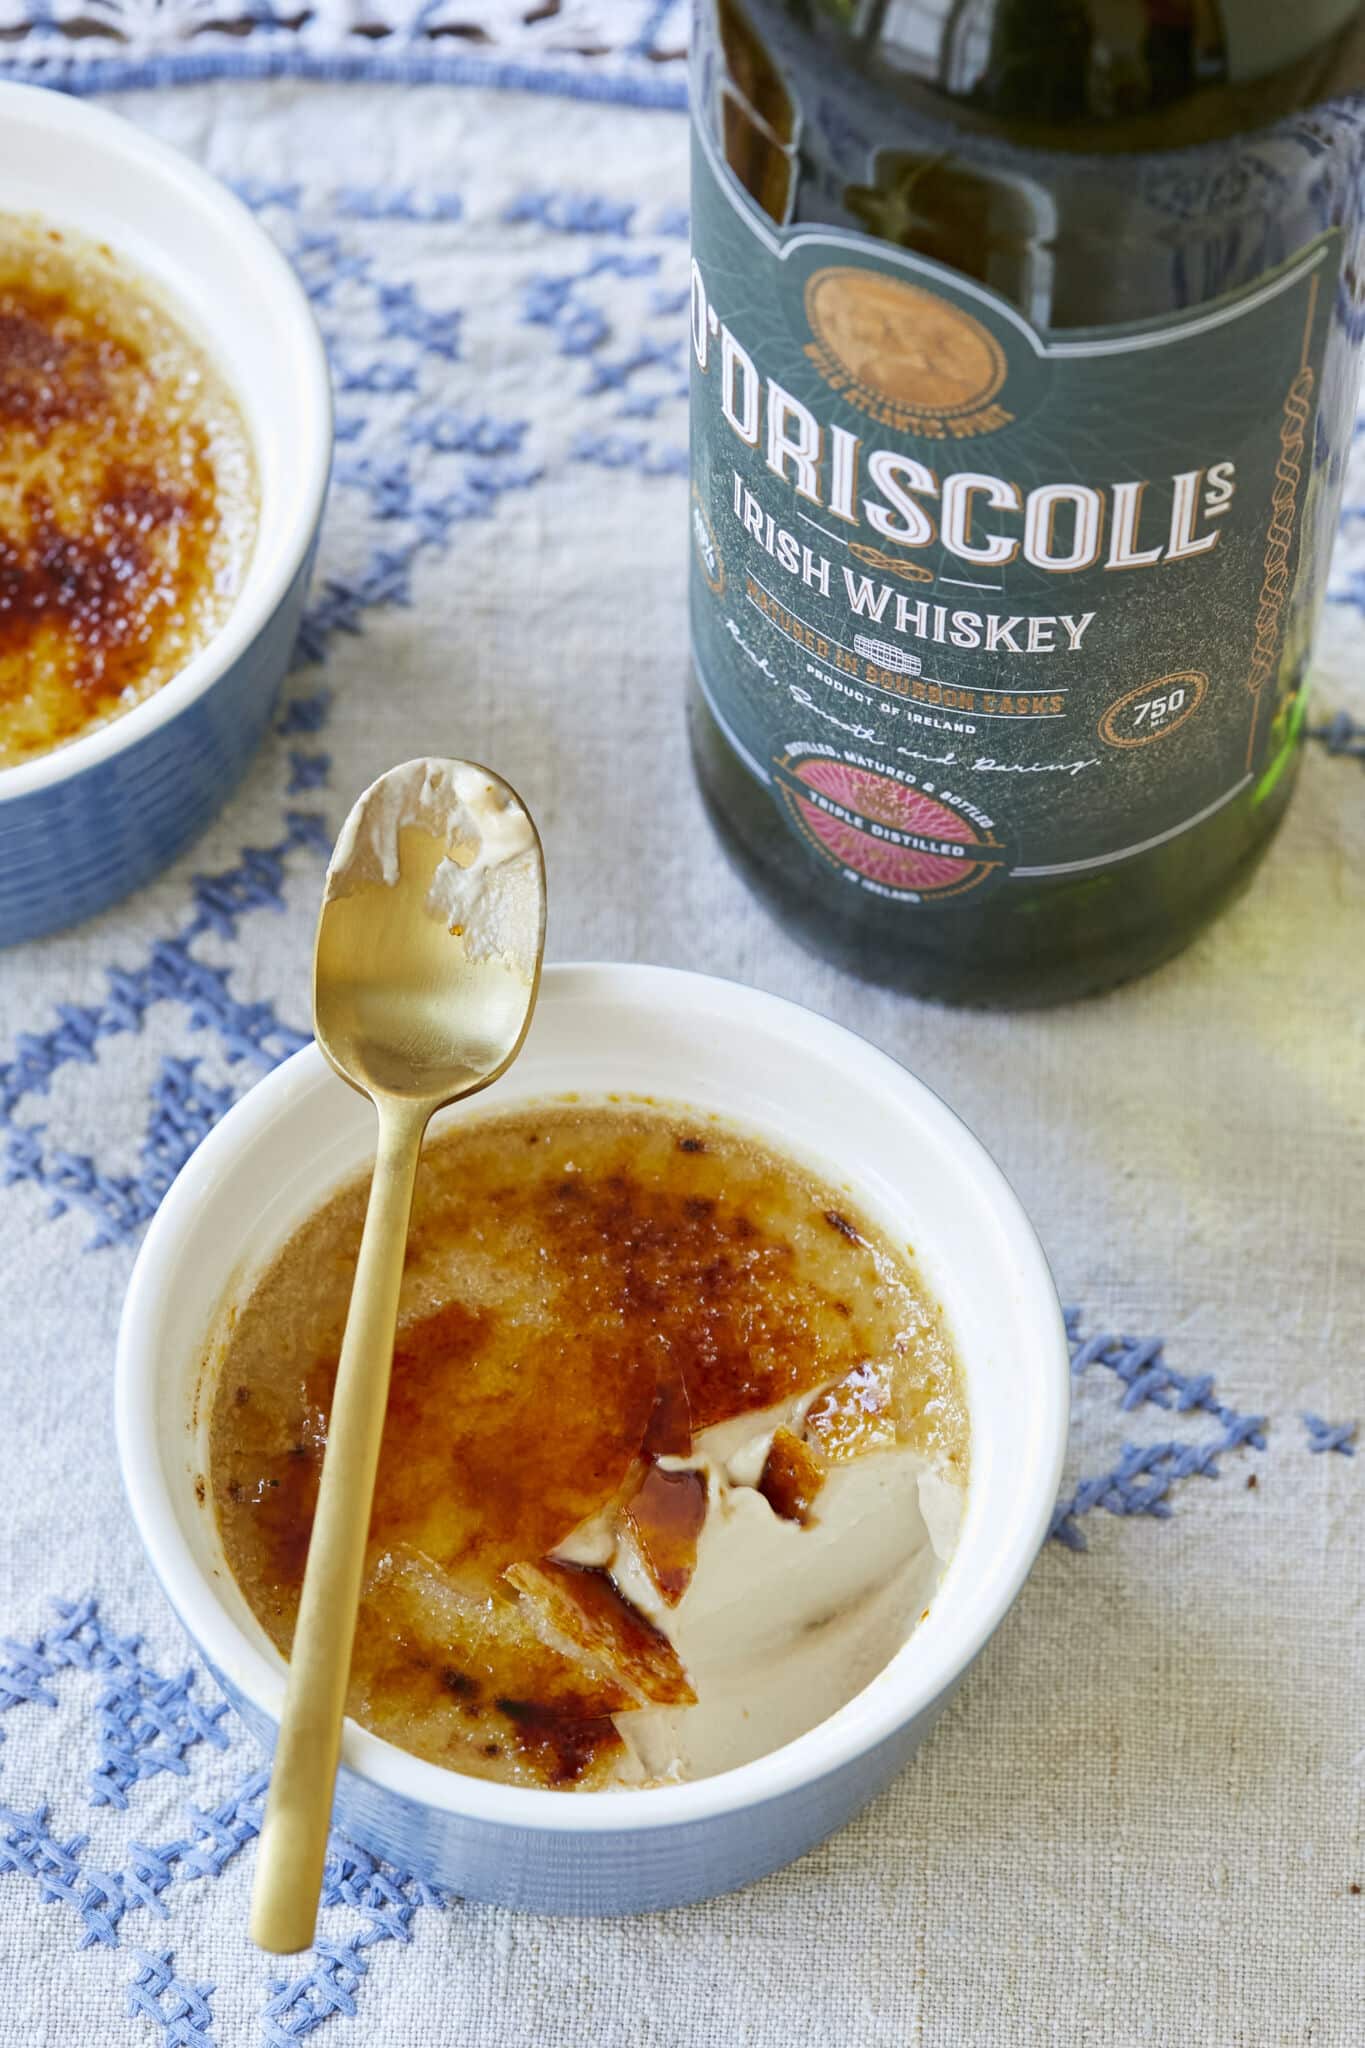 A close-up shot of Irish Whiskey Crème Brûlée shows the caramelized crunch top and silky smooth custard interior. A bottle of Irish Whiskey is on the side. 